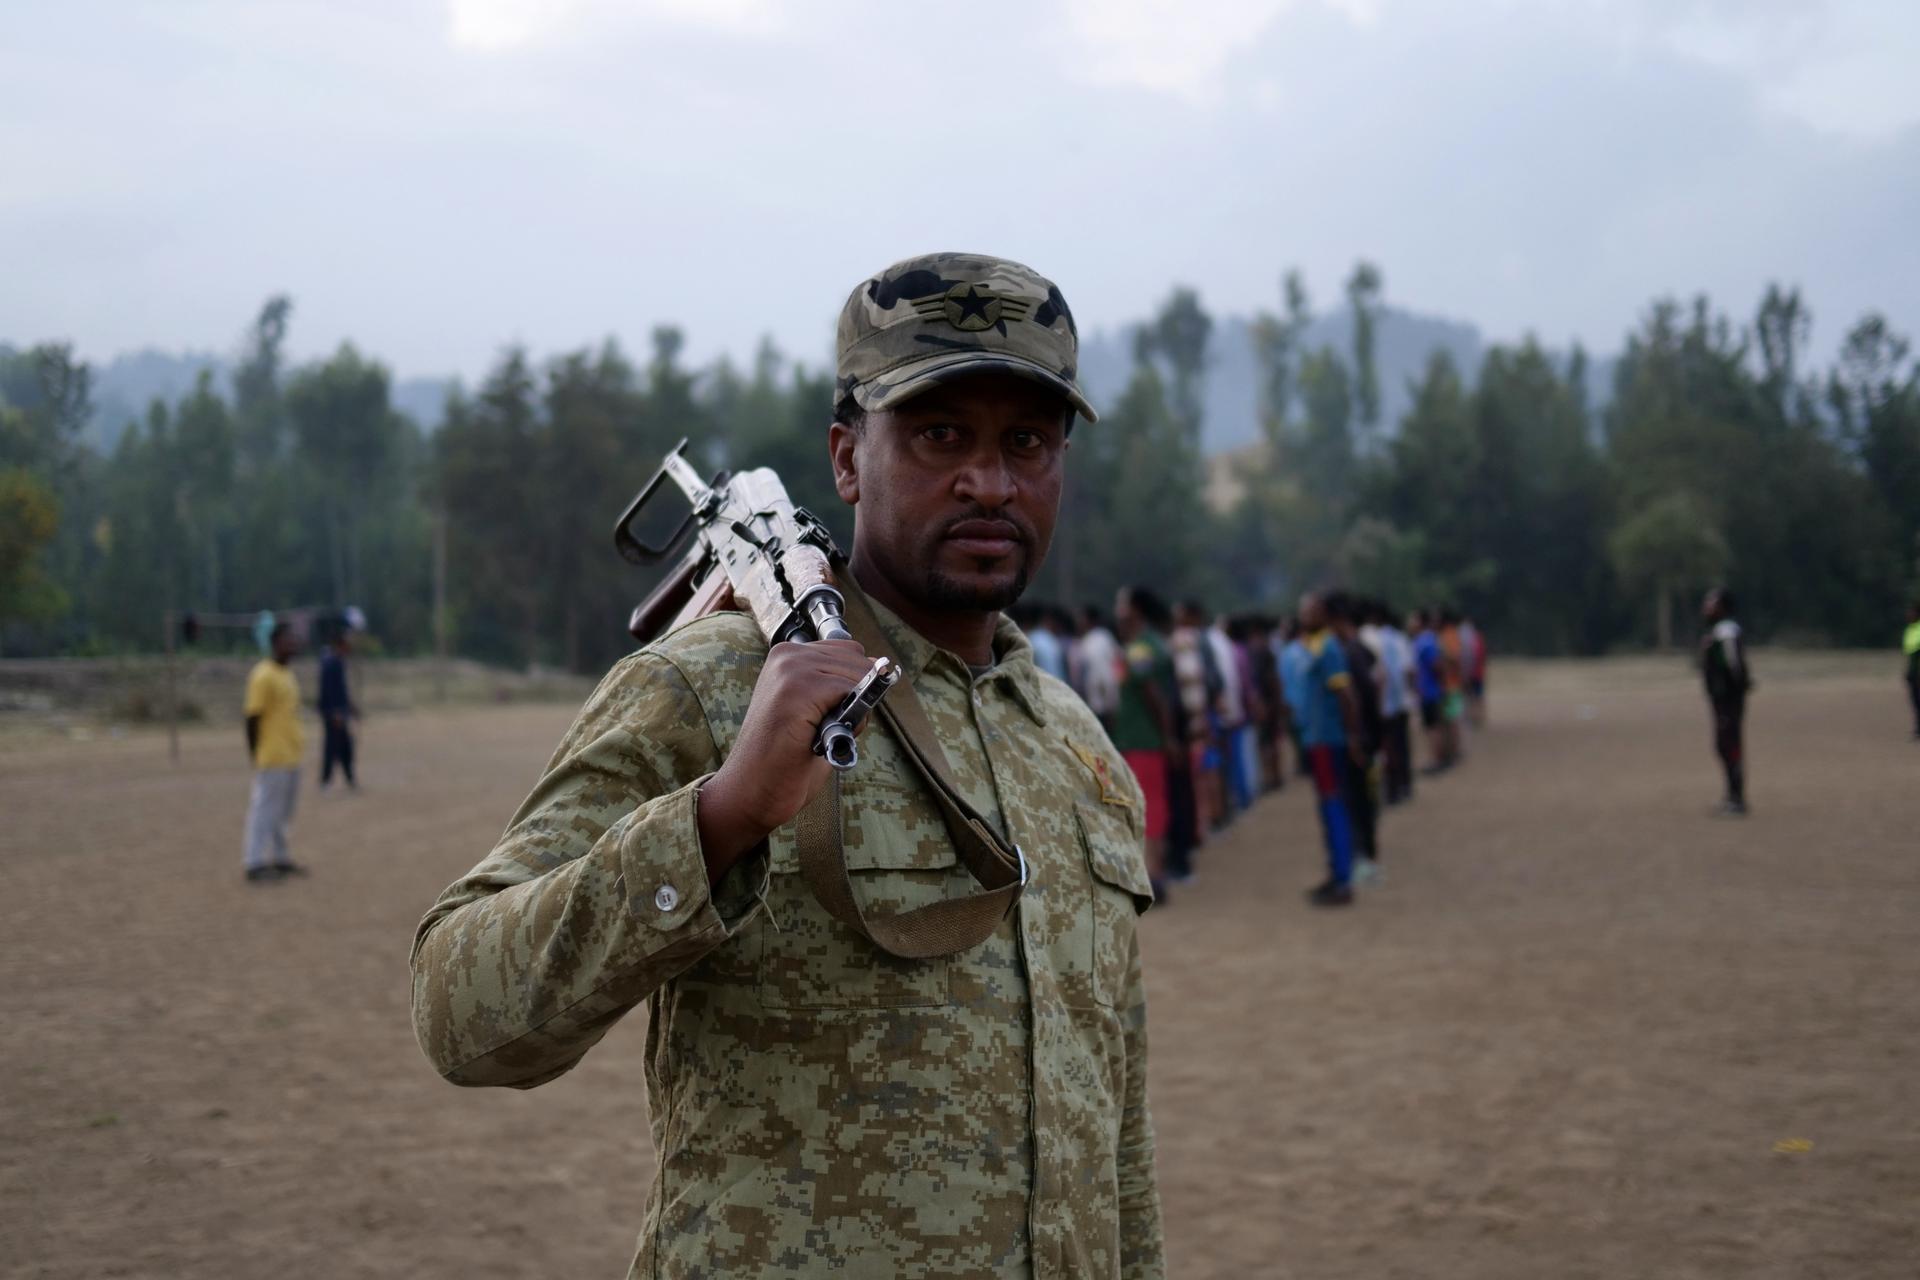 Moges Kebede oversees a training for new civilian recruits to the FANO Amhara militia in Woldiya, Ethiopia, Feb. 20, 2022.